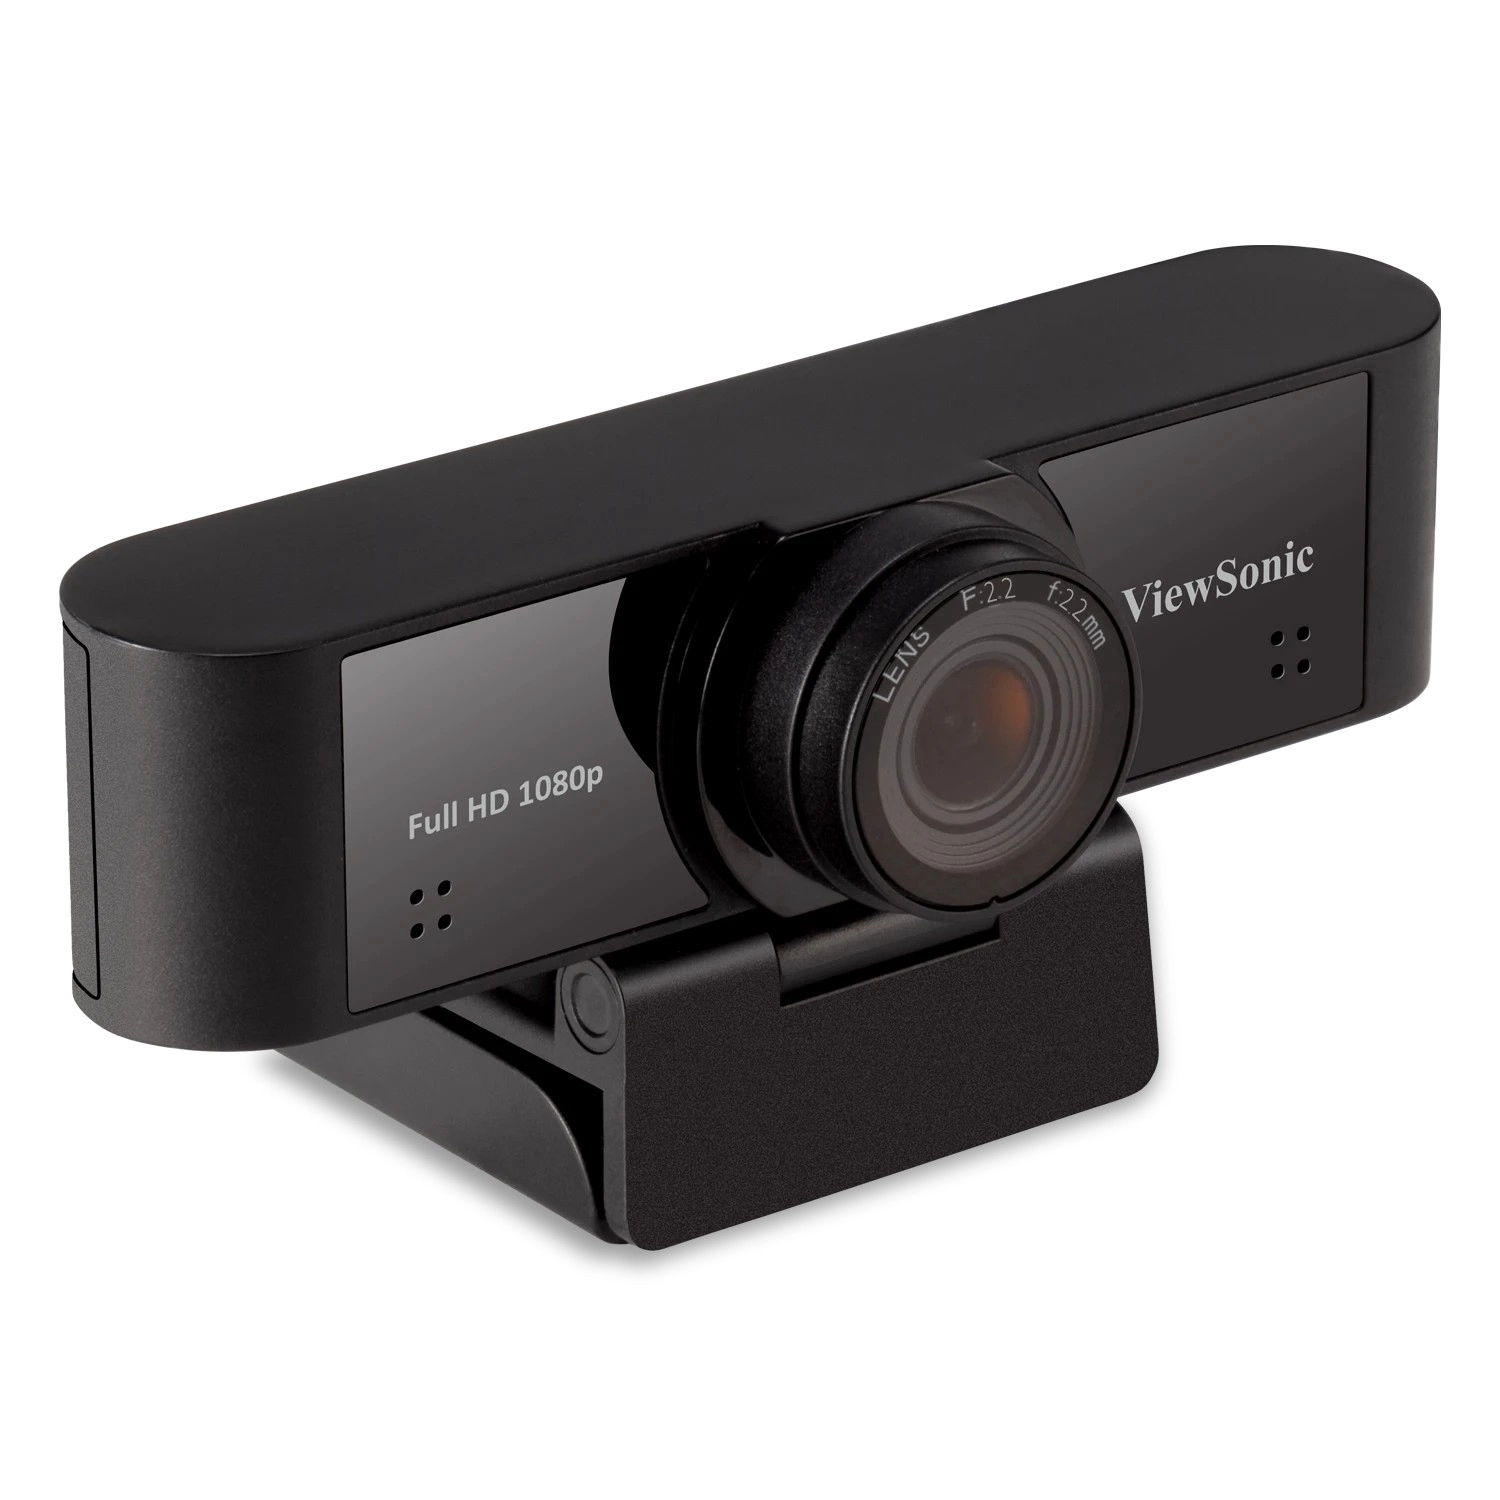 VIEWSONIC VB-CAM-001, Full HD Webcam, Sensor 2.07 Mpx CMOS, up to 1080p@30fps/25fps, Superior Clarity, Wide Field of View 110°, Exceptional Low-Light Performance F2.2, Flexible Mounting Options, Dual Integrated Microphones, Remarkable Sound